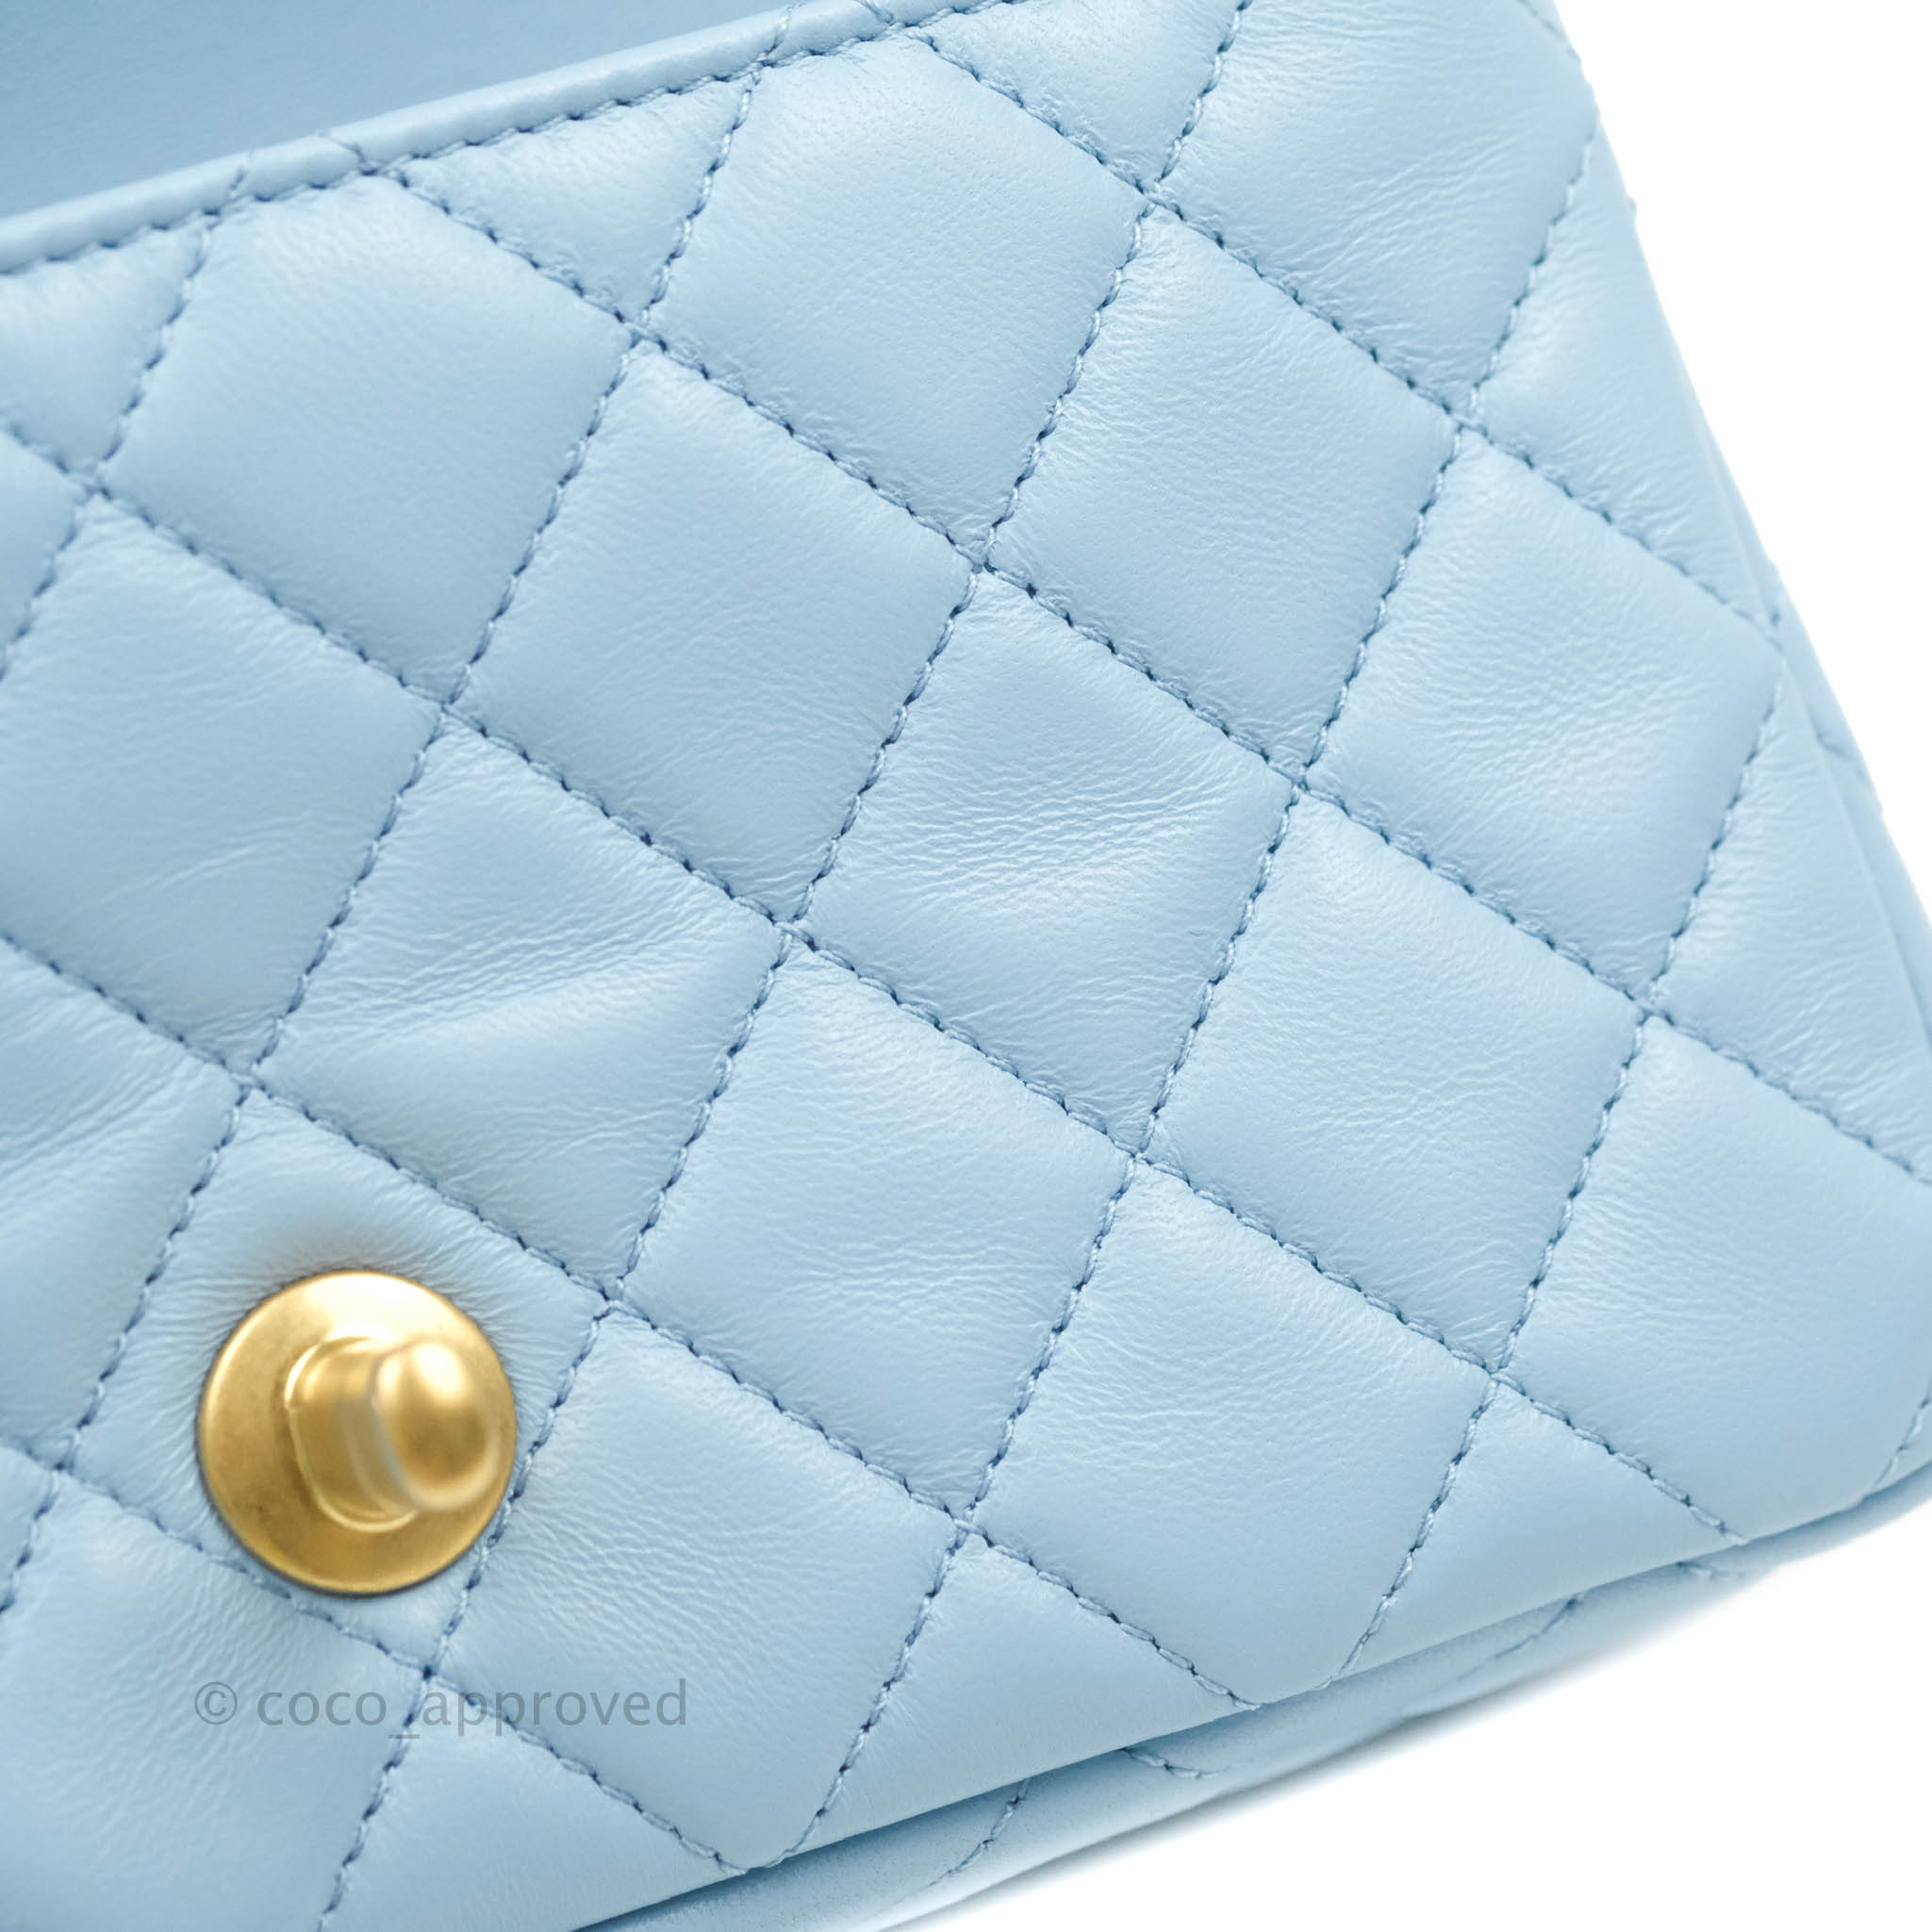 Chanel Mini Rectangular Pearl Crush Quilted Blue Lambskin Aged Gold Ha – Coco  Approved Studio